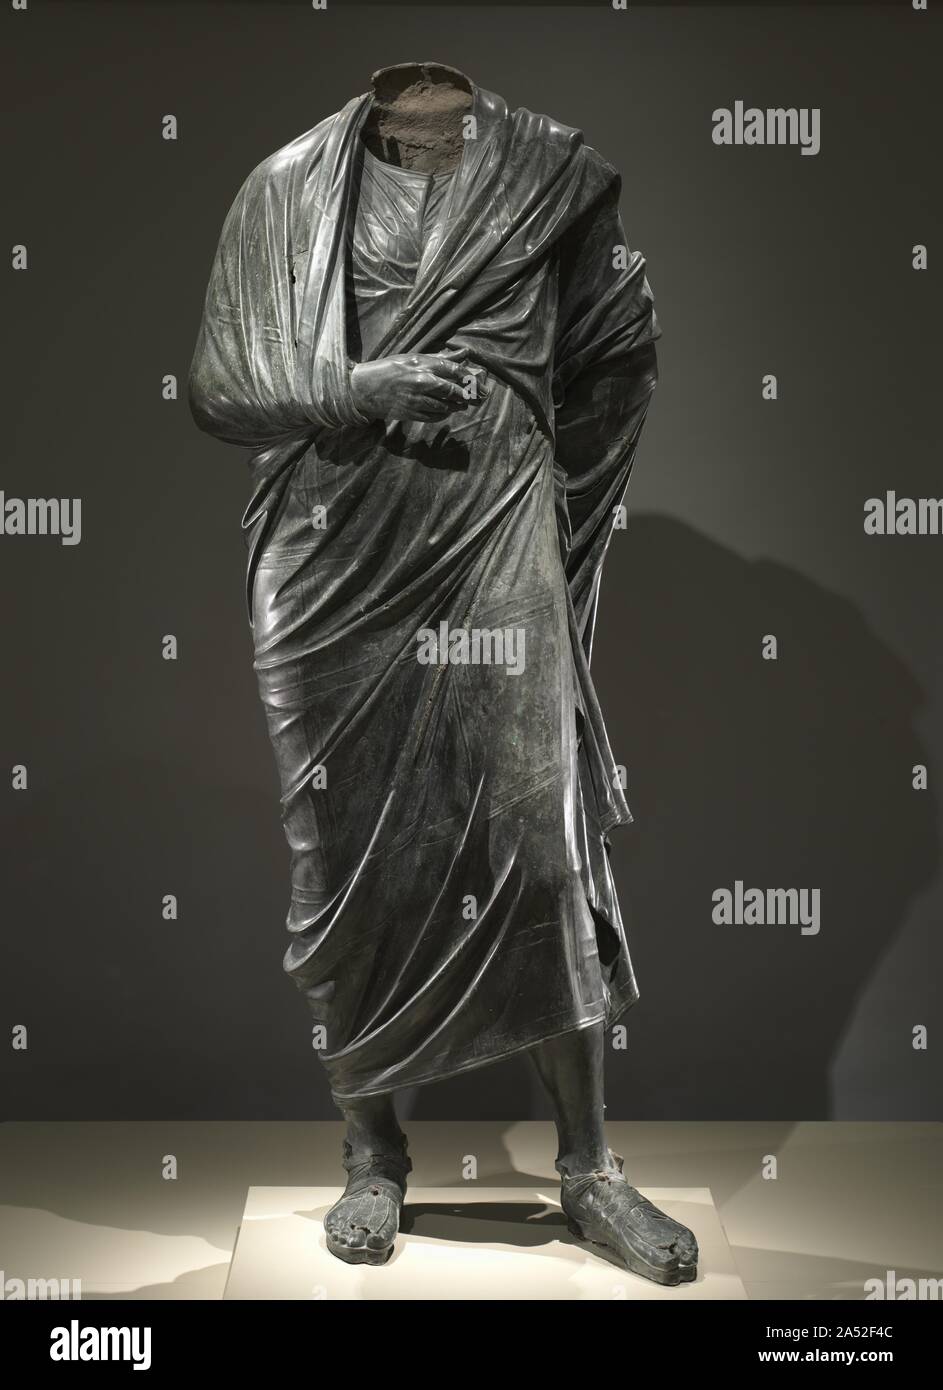 The Emperor as Philosopher, probably Marcus Aurelius (reigned AD 161-180), c. AD 180-200. The extremely high quality and monumental scale of this bronze draped figure suggest that this is an imperial portrait. The pose with left leg forward, right arm raised to the chest, and right hand visible - is identical to several Greek portraits of philosophers. The figure is most probably the Roman emperor Marcus Aurelius, who was a student of Stoicism, a set of Greek philosophical beliefs popular among educated Romans of his day. Marcus Aurelius wrote a collection of philosophical reflections called M Stock Photo